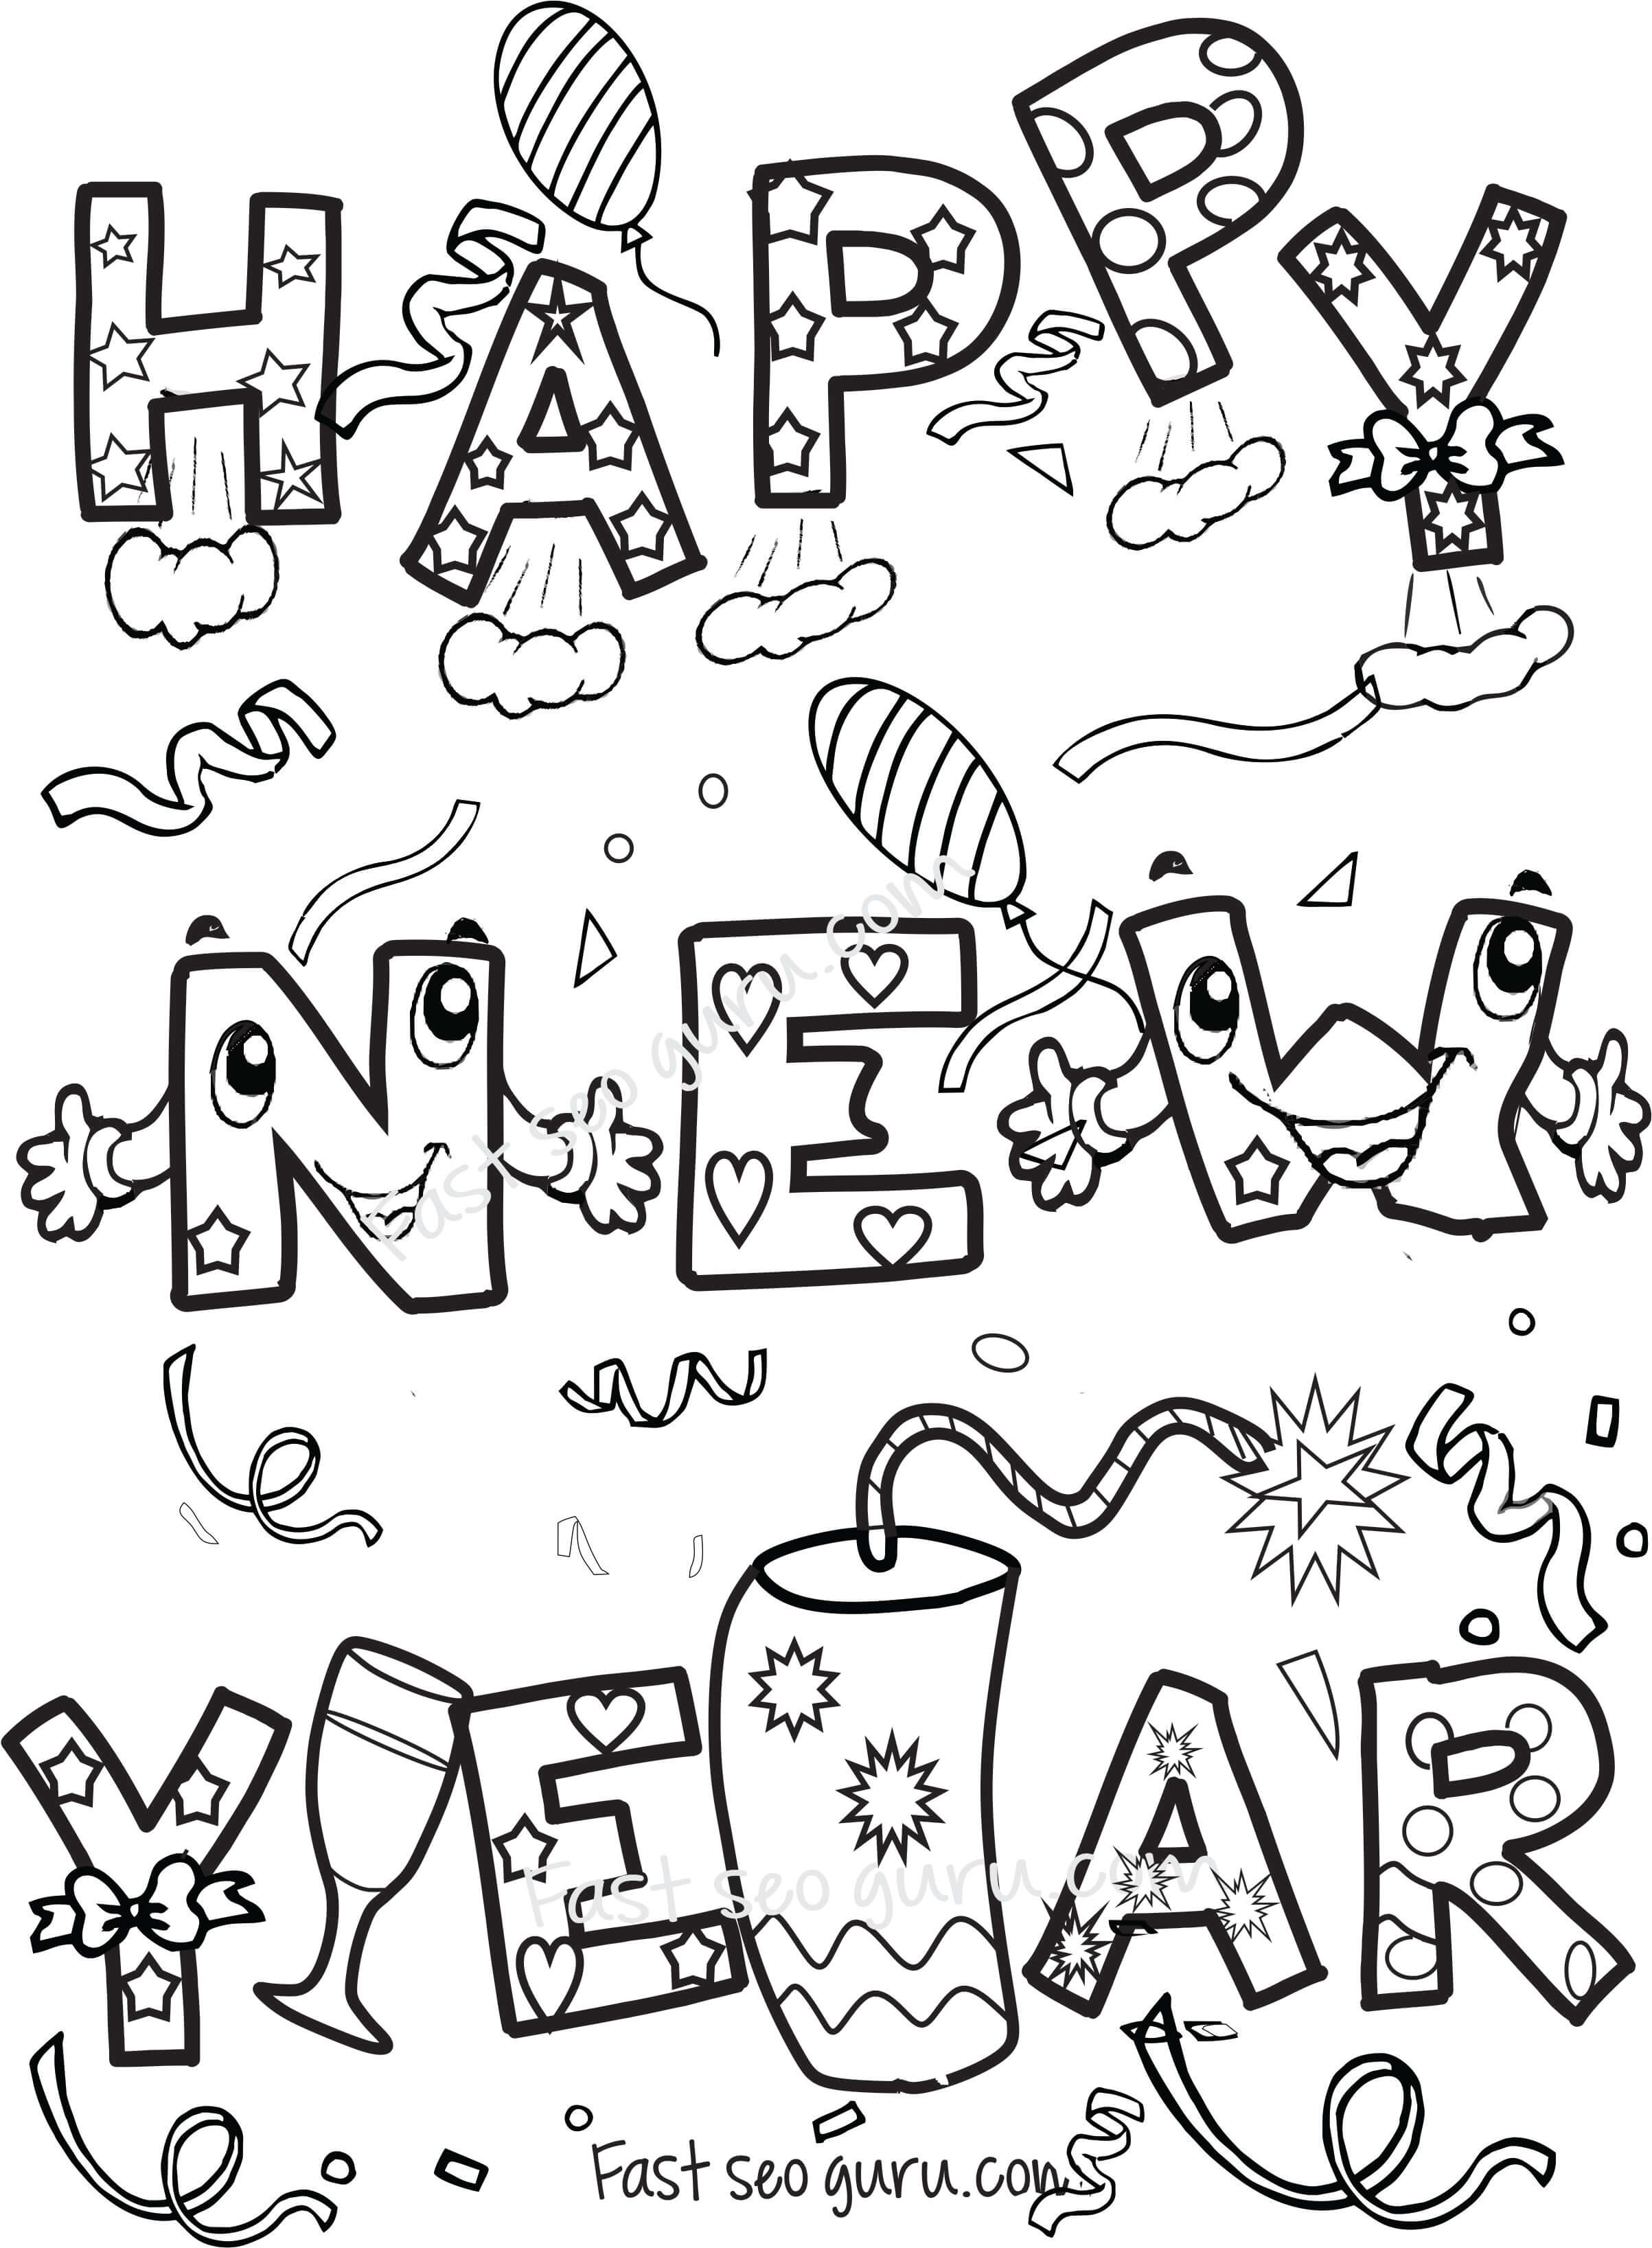 Happy new year coloring sheets for kids